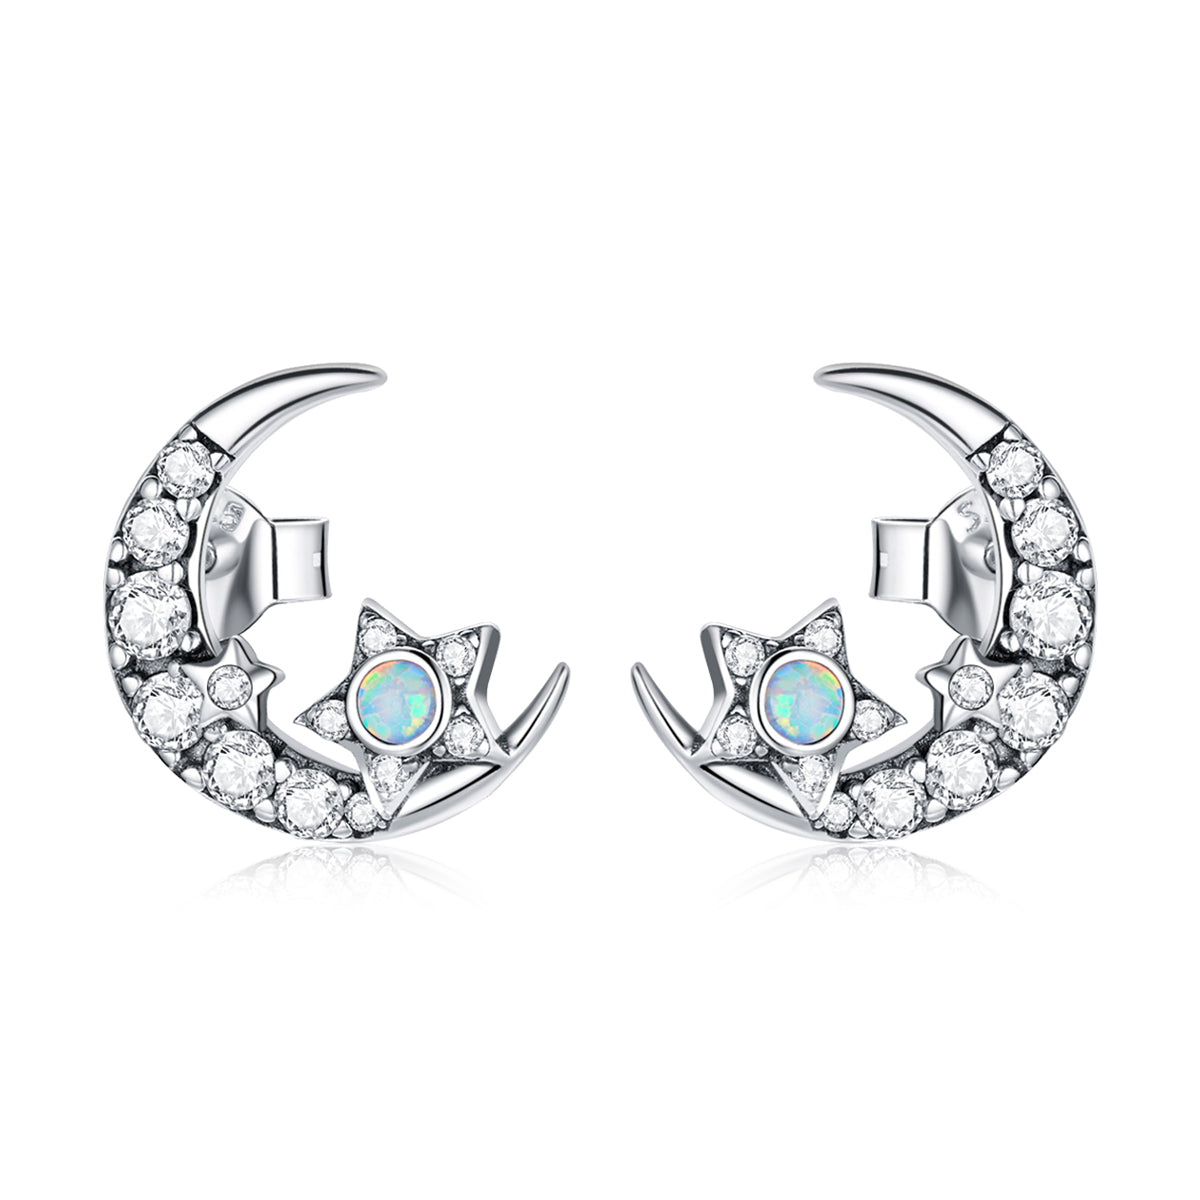 Moon and Stars Earrings - Sterling Silver 925 - Zircon with Opal like - NEW622